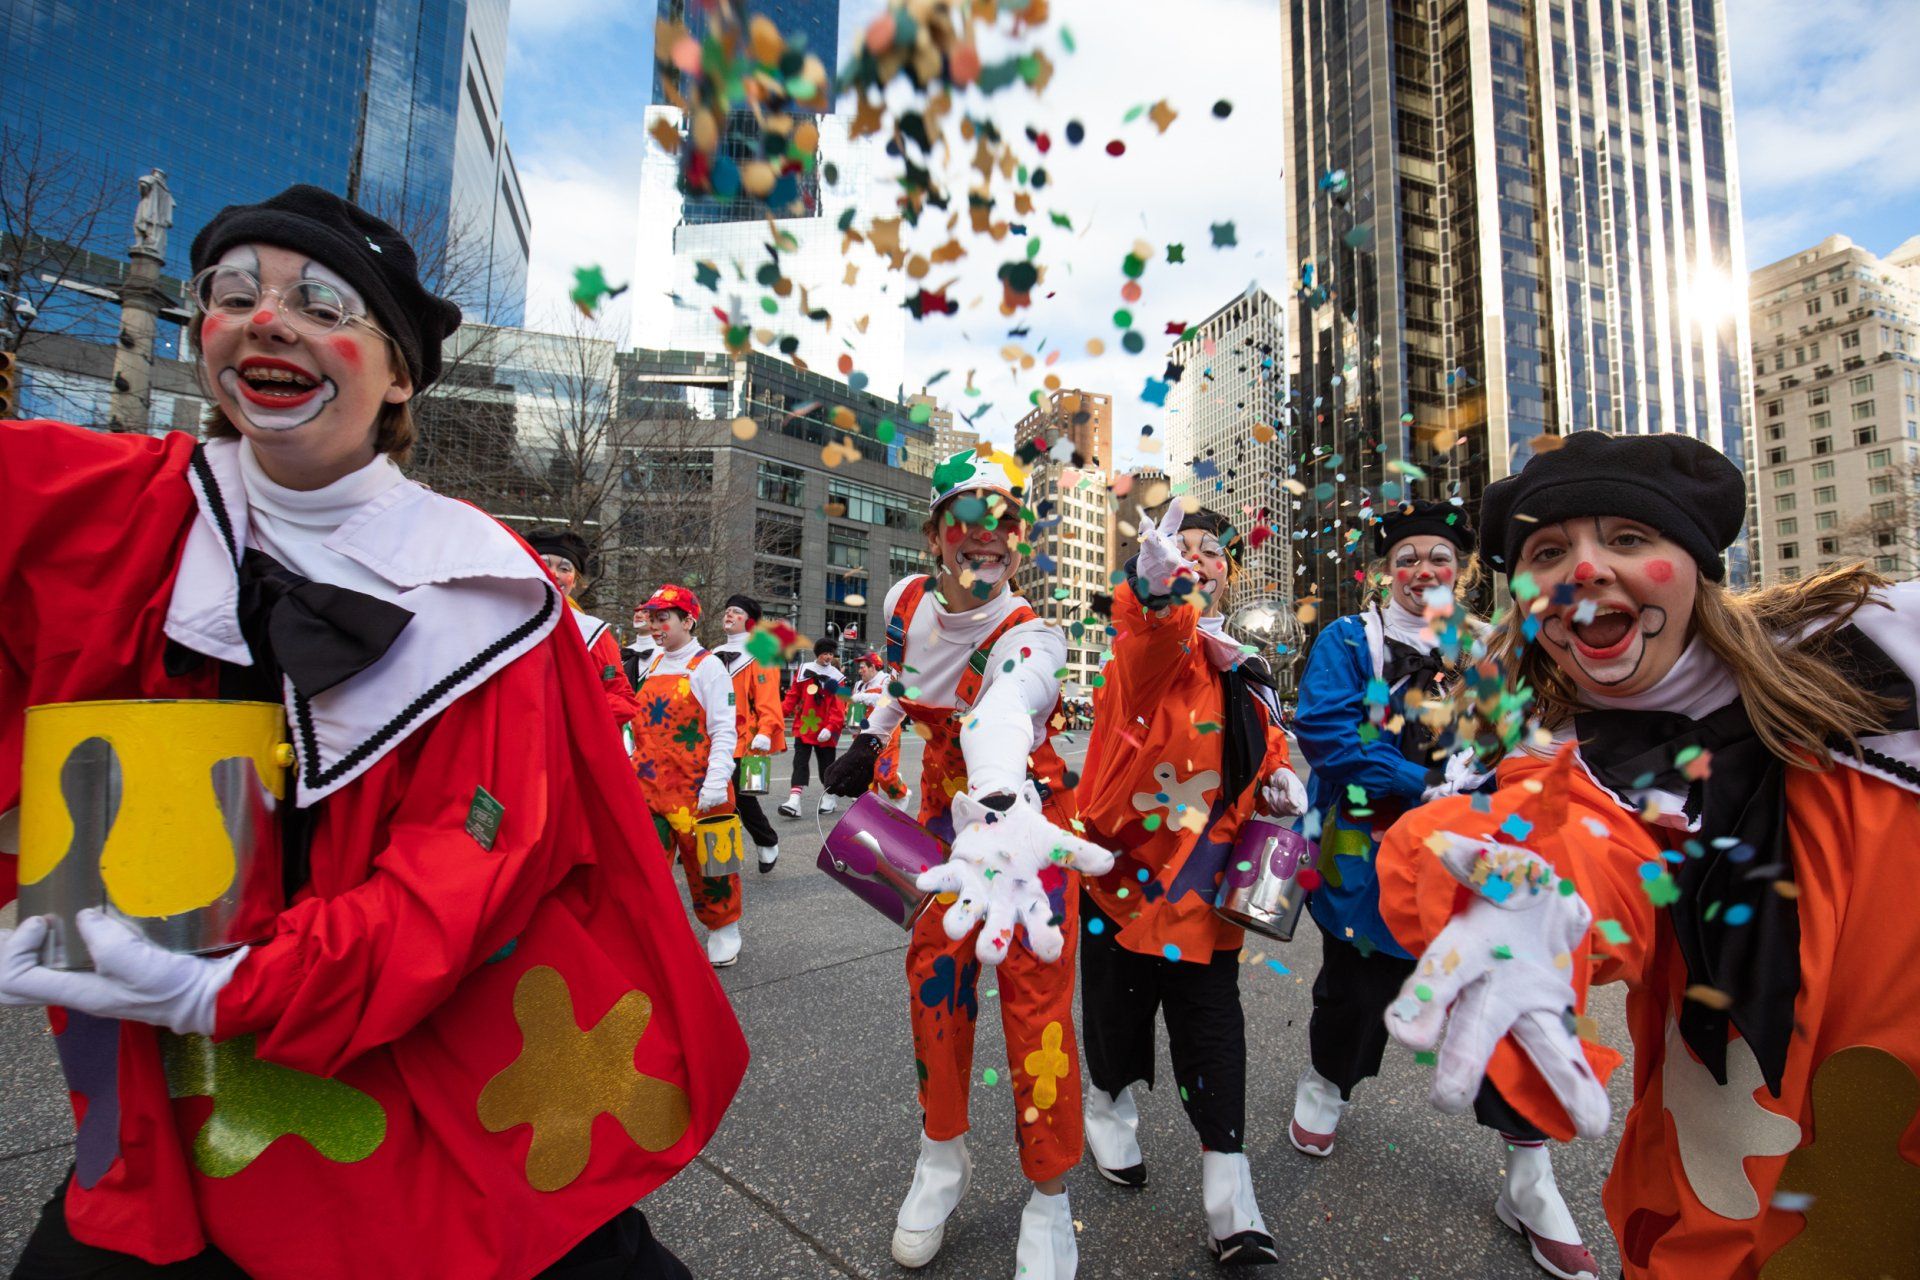 Largest Thanksgiving Day Parade: Macy's Thanksgiving Day Parade sets world record